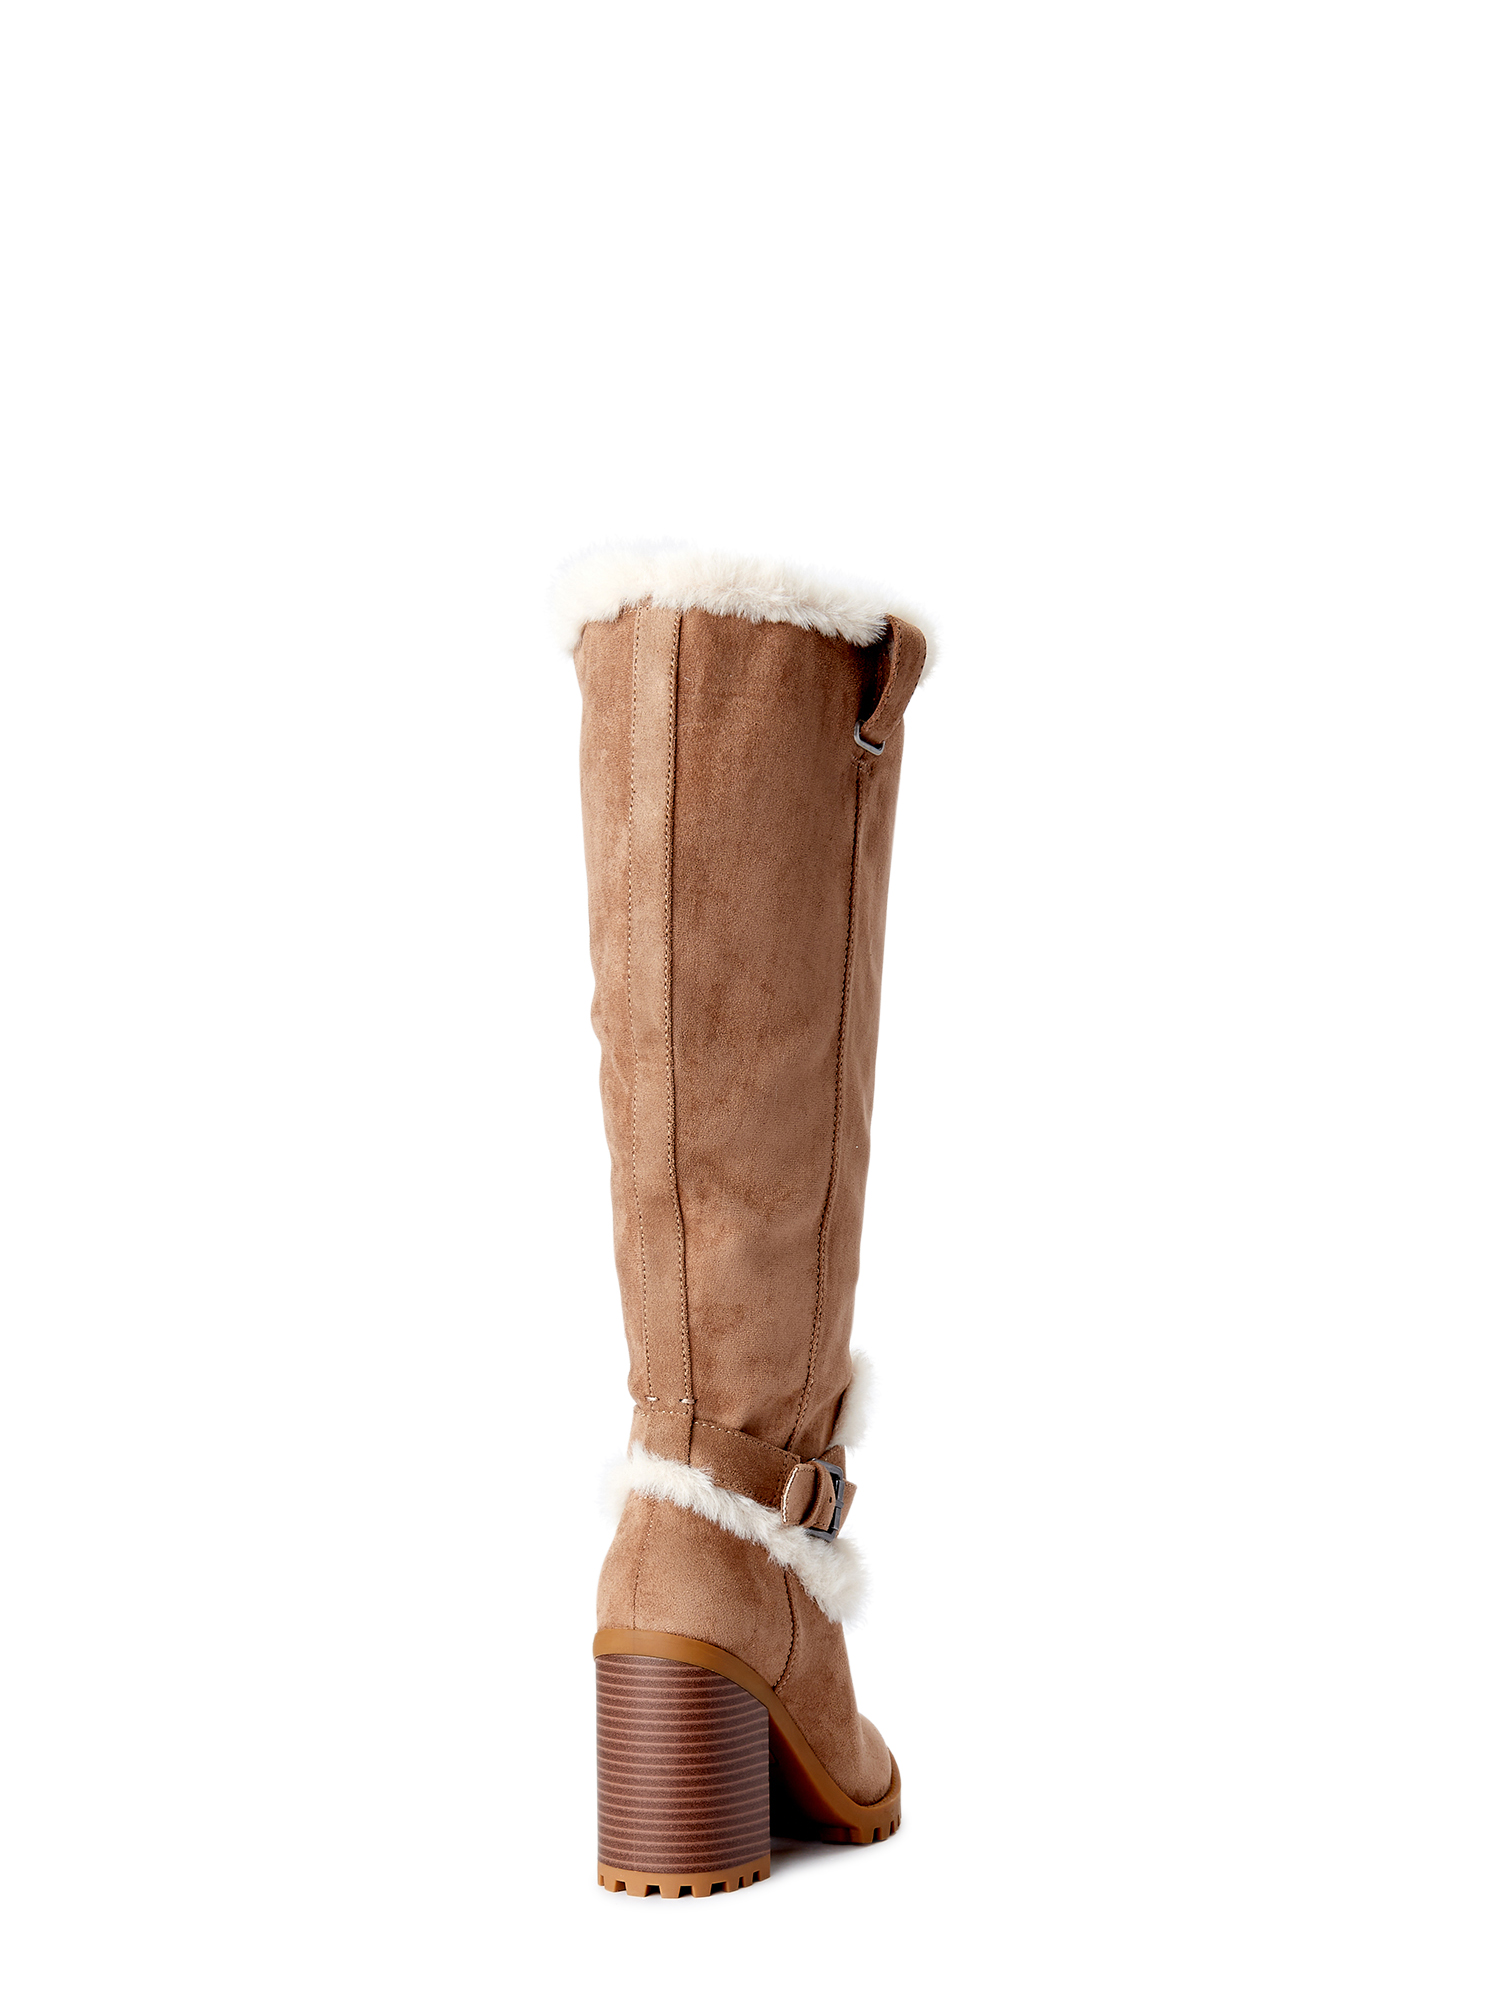 Scoop Women's Faux Suede Knee-High Boots with Faux Fur Trim